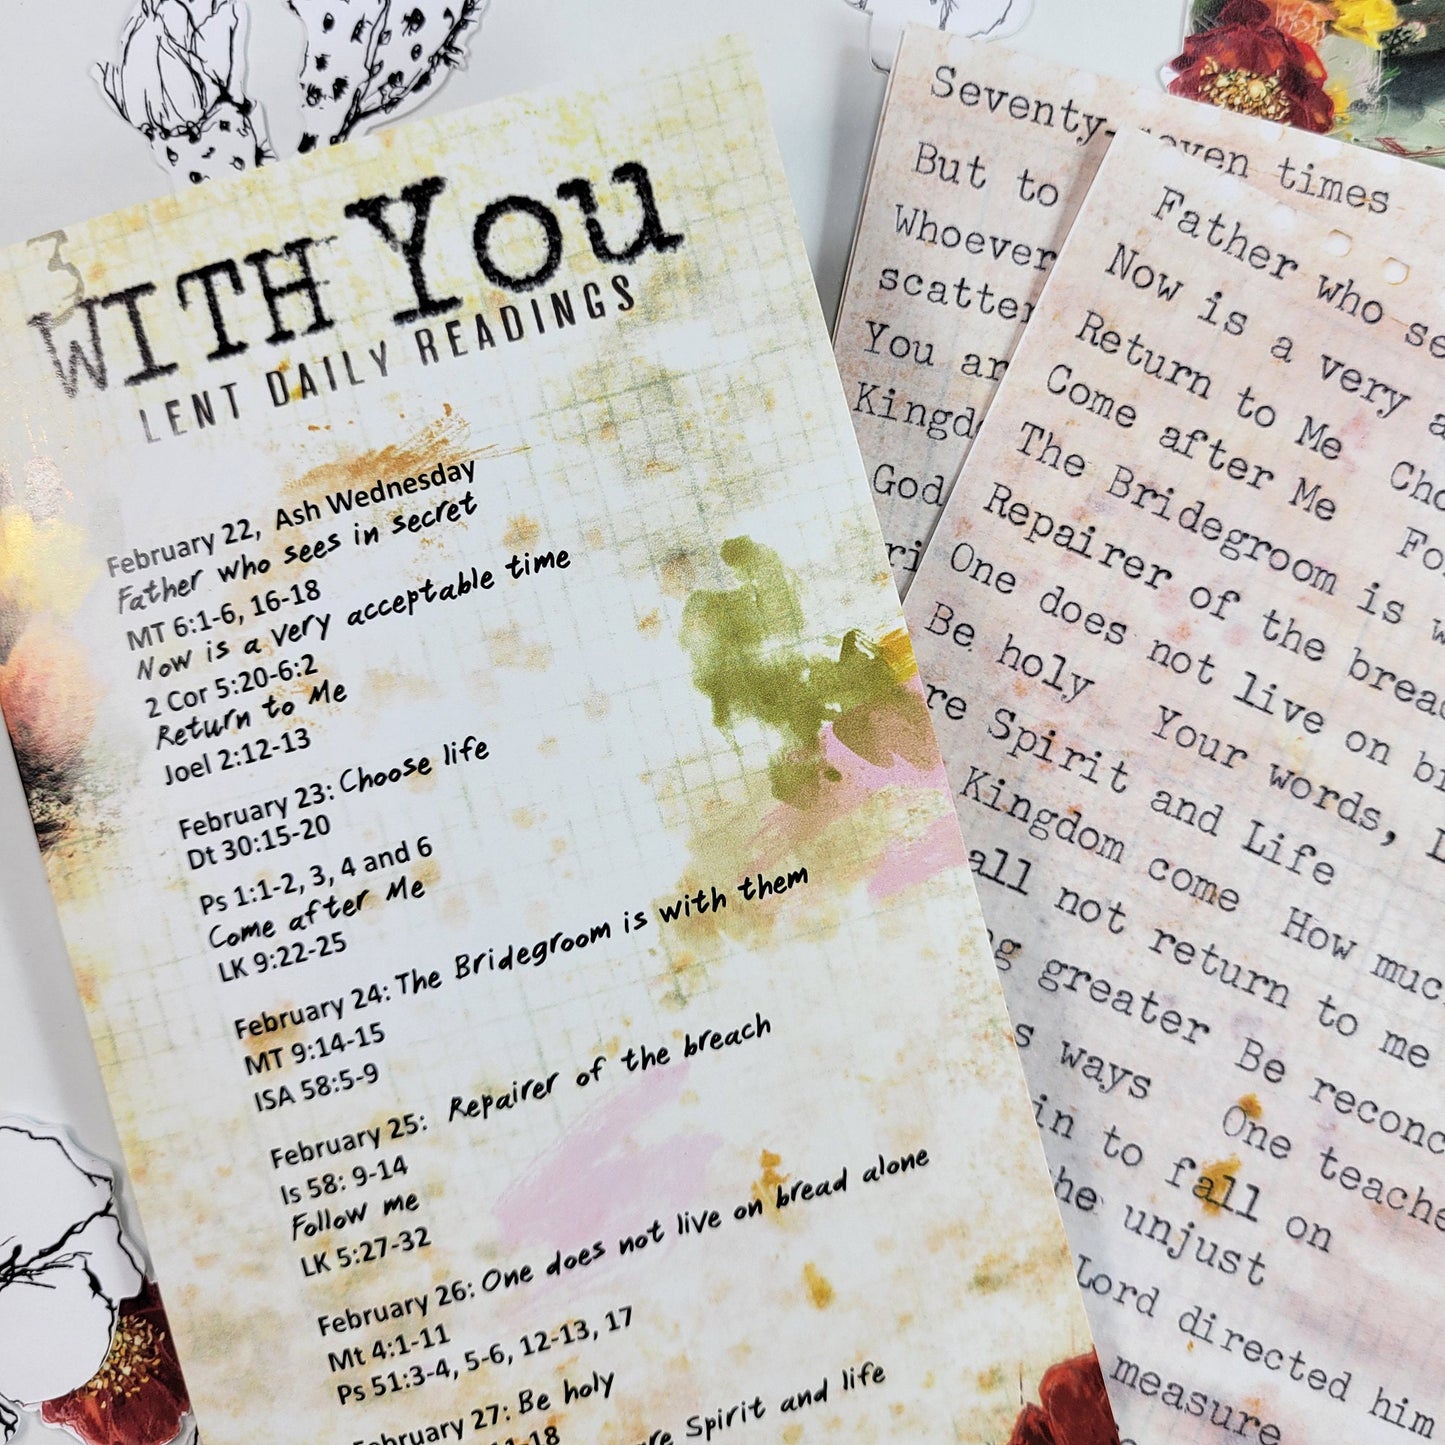 With You- a creative bible study / Bible journaling creative devotional kit